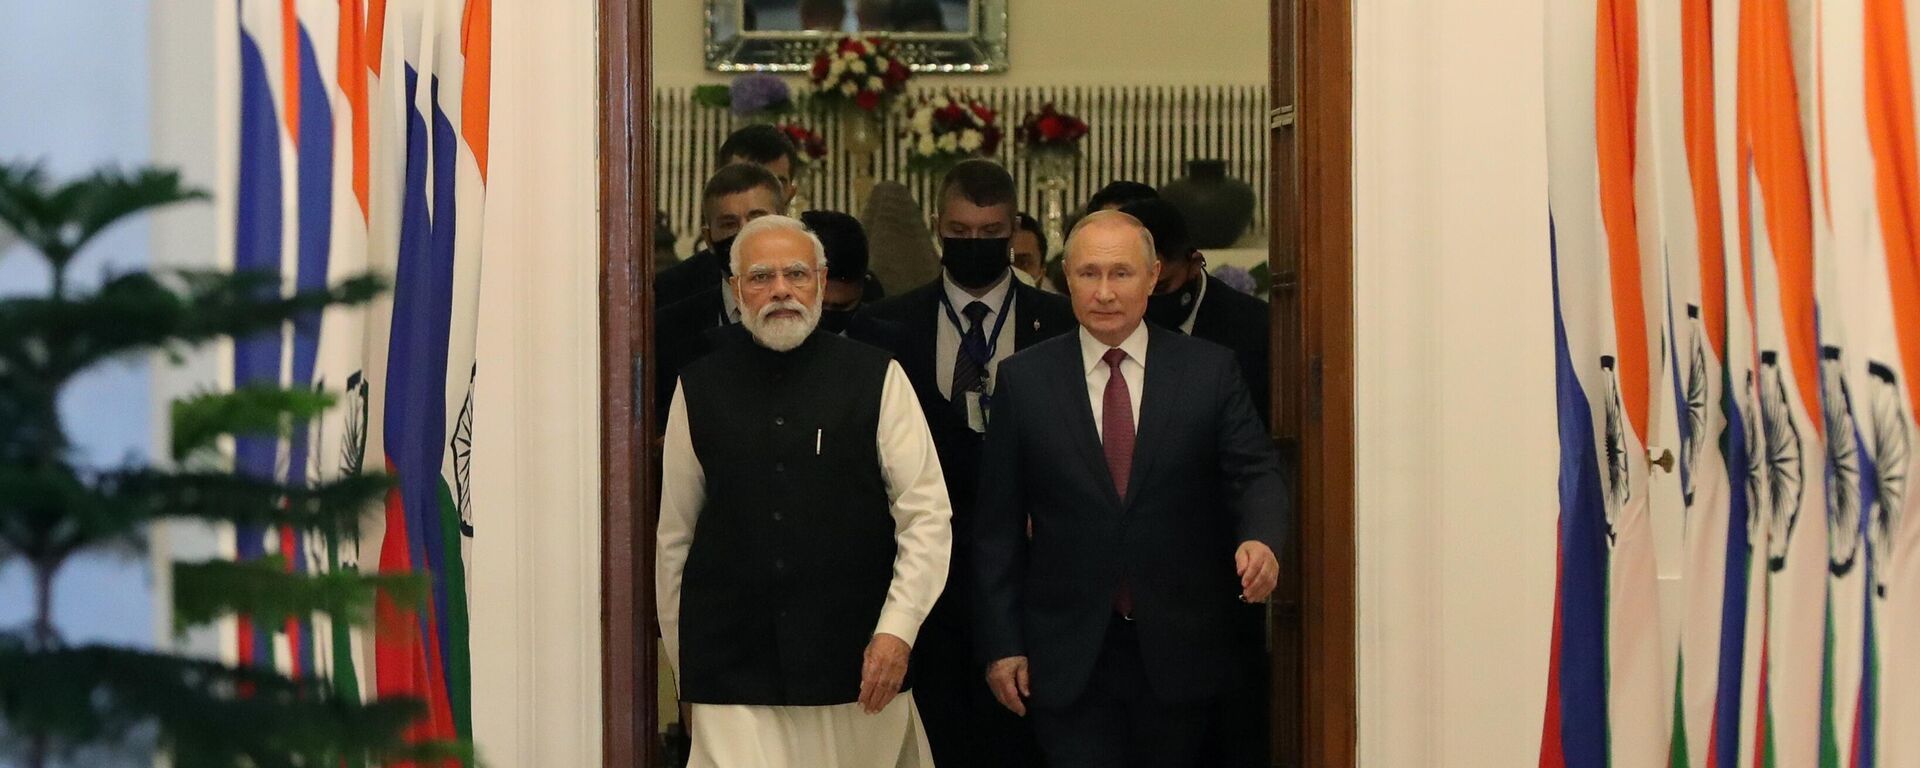  Russian President Vladimir Putin and Prime Minister of the Republic of India Narendra Modi (left) during a meeting at the Hyderabad Palace in New Delh - Sputnik International, 1920, 23.09.2022